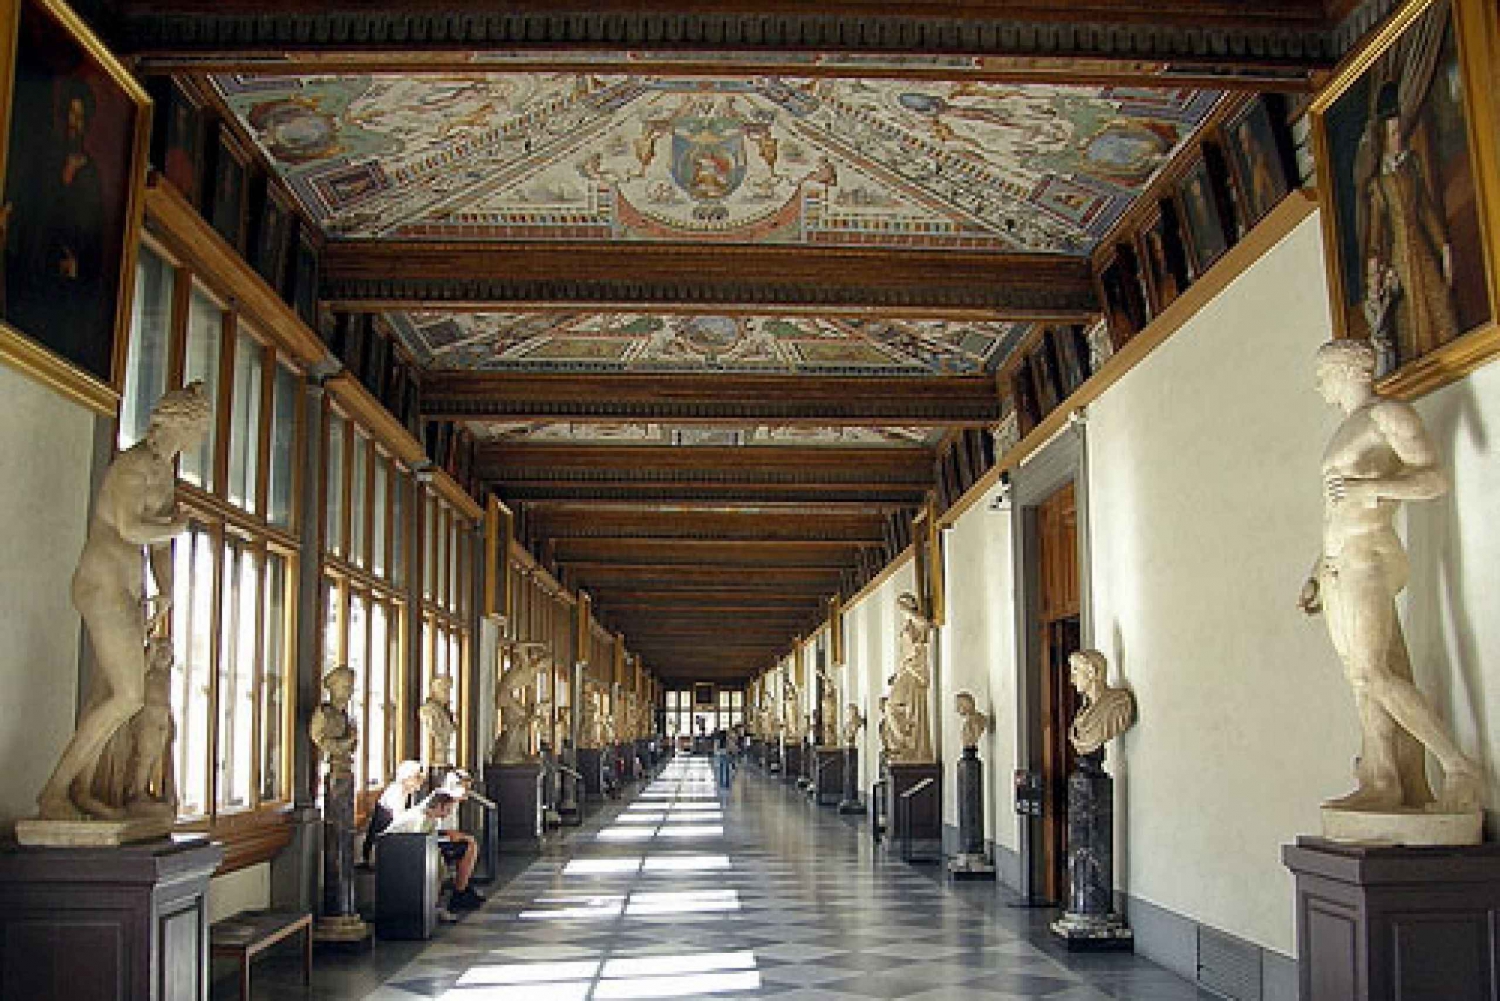 Florence: Full-Day Tour with Uffizi and Accademia Gallery